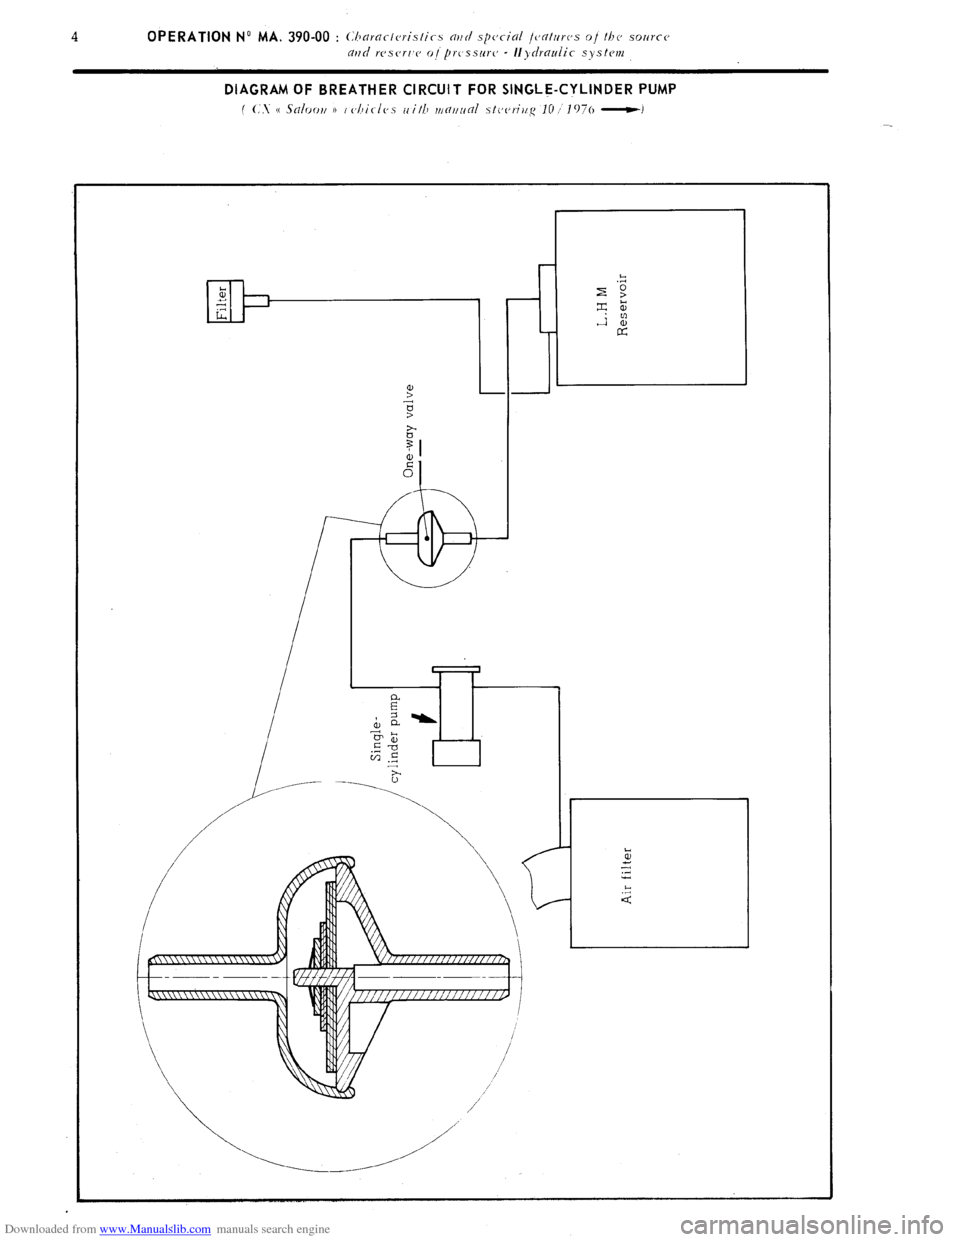 Citroen CX 1985 1.G Workshop Manual Downloaded from www.Manualslib.com manuals search engine DIAGRAM OF BREATHER CIRCUIT FOR SINGLE-CYLINDER PUMP 
f (:. e Saloori 1) i cjhirles with mf7~7~inl stcjeriiig IO I 1976 -1   